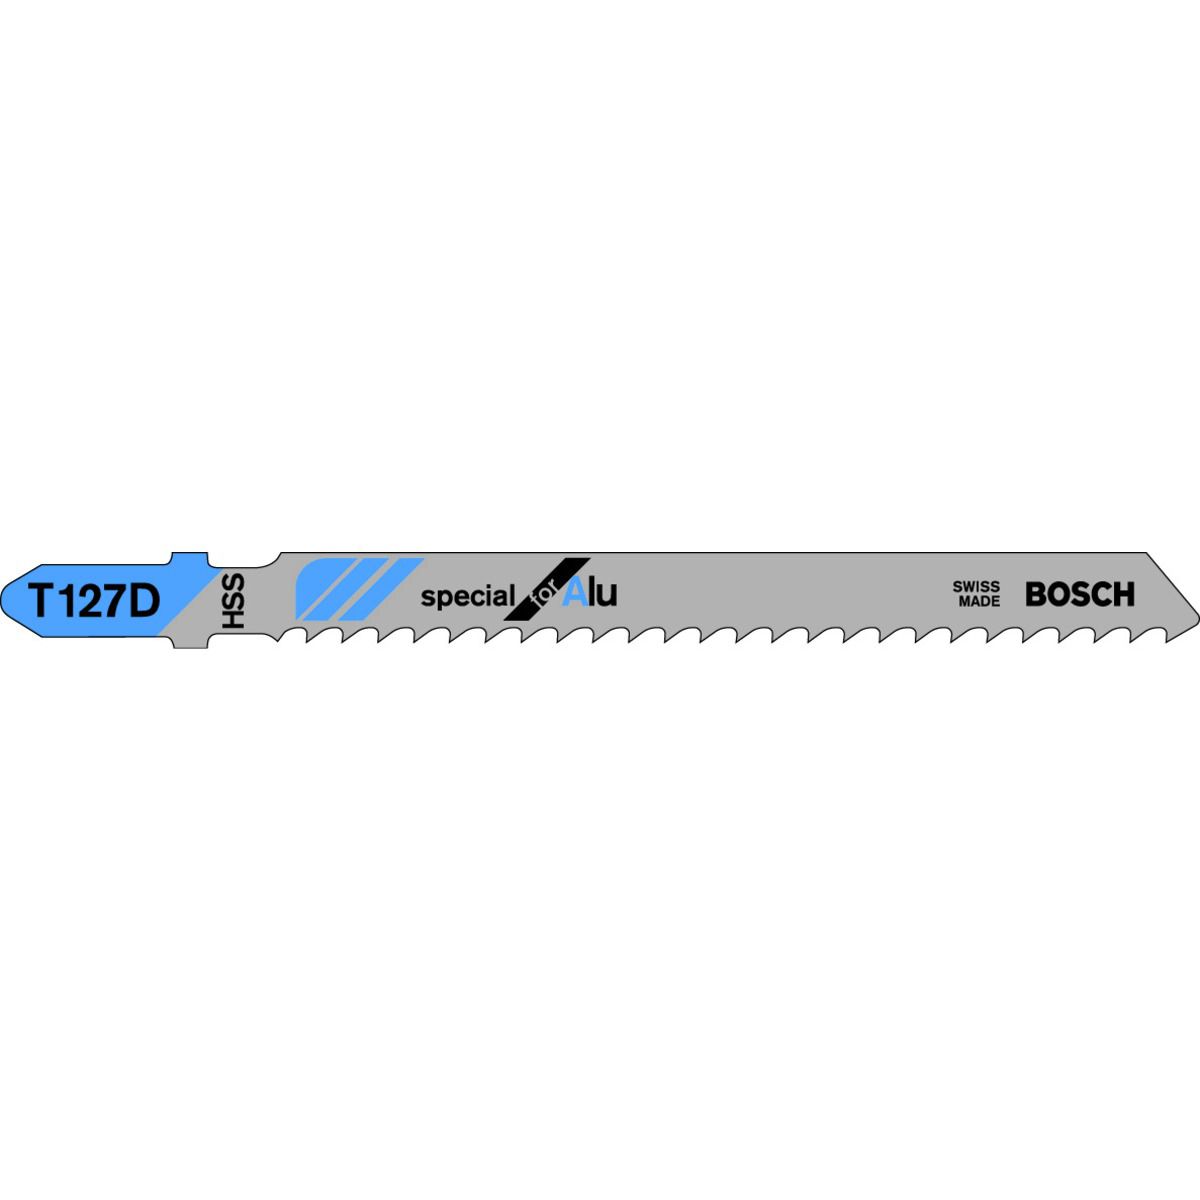 Image of Bosch T127D Metal Jigsaw Blades - Pack of 5